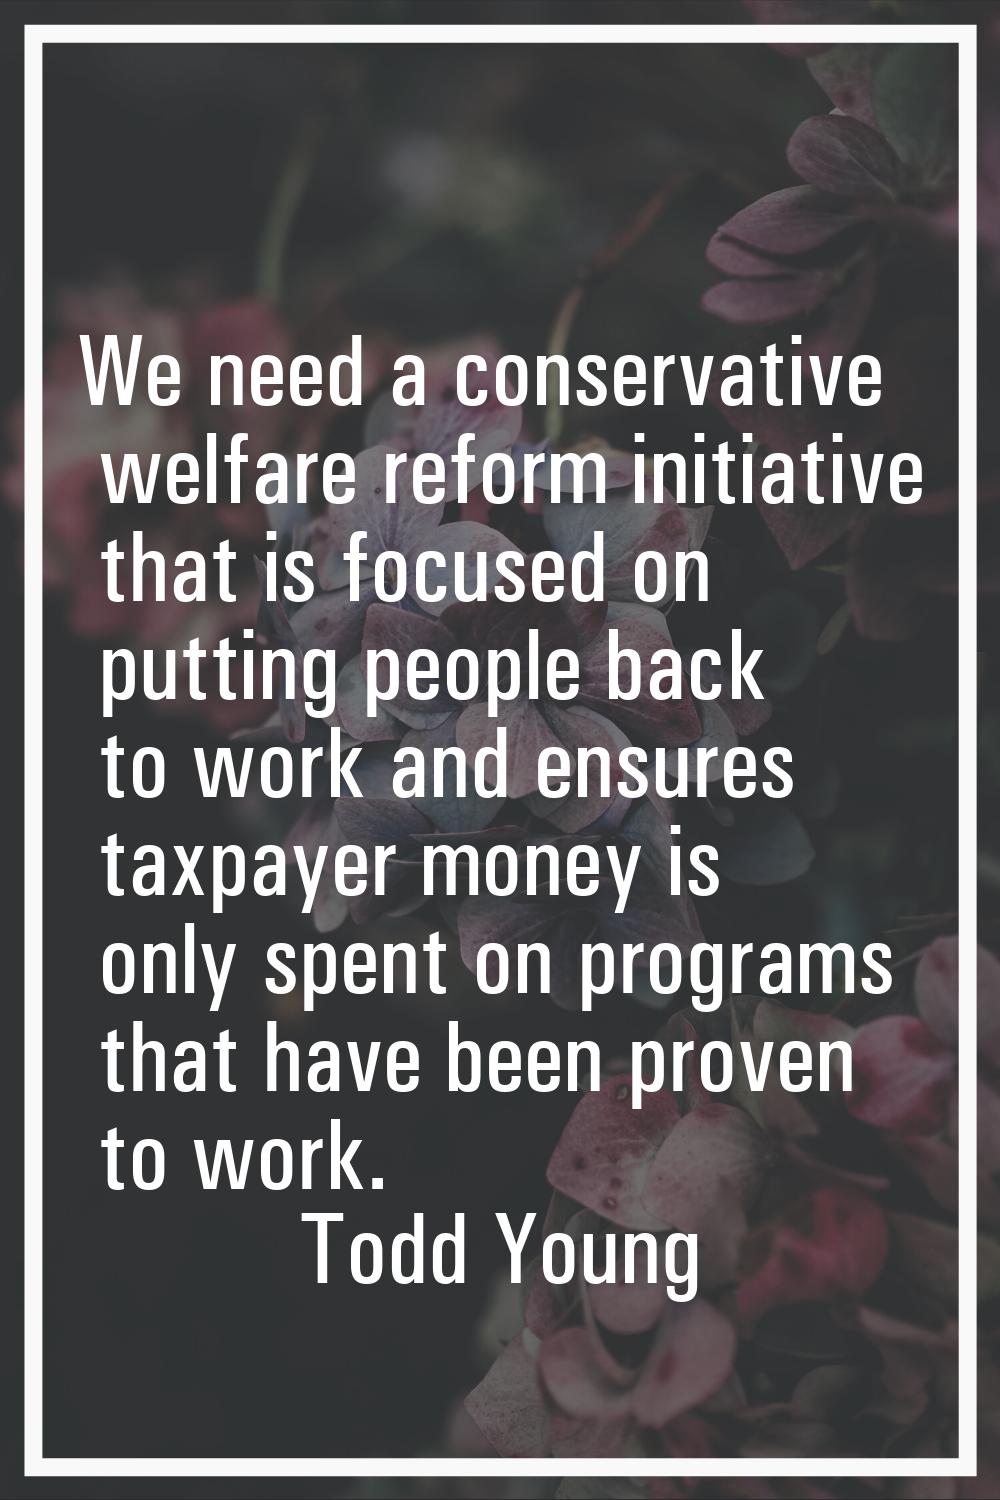 We need a conservative welfare reform initiative that is focused on putting people back to work and